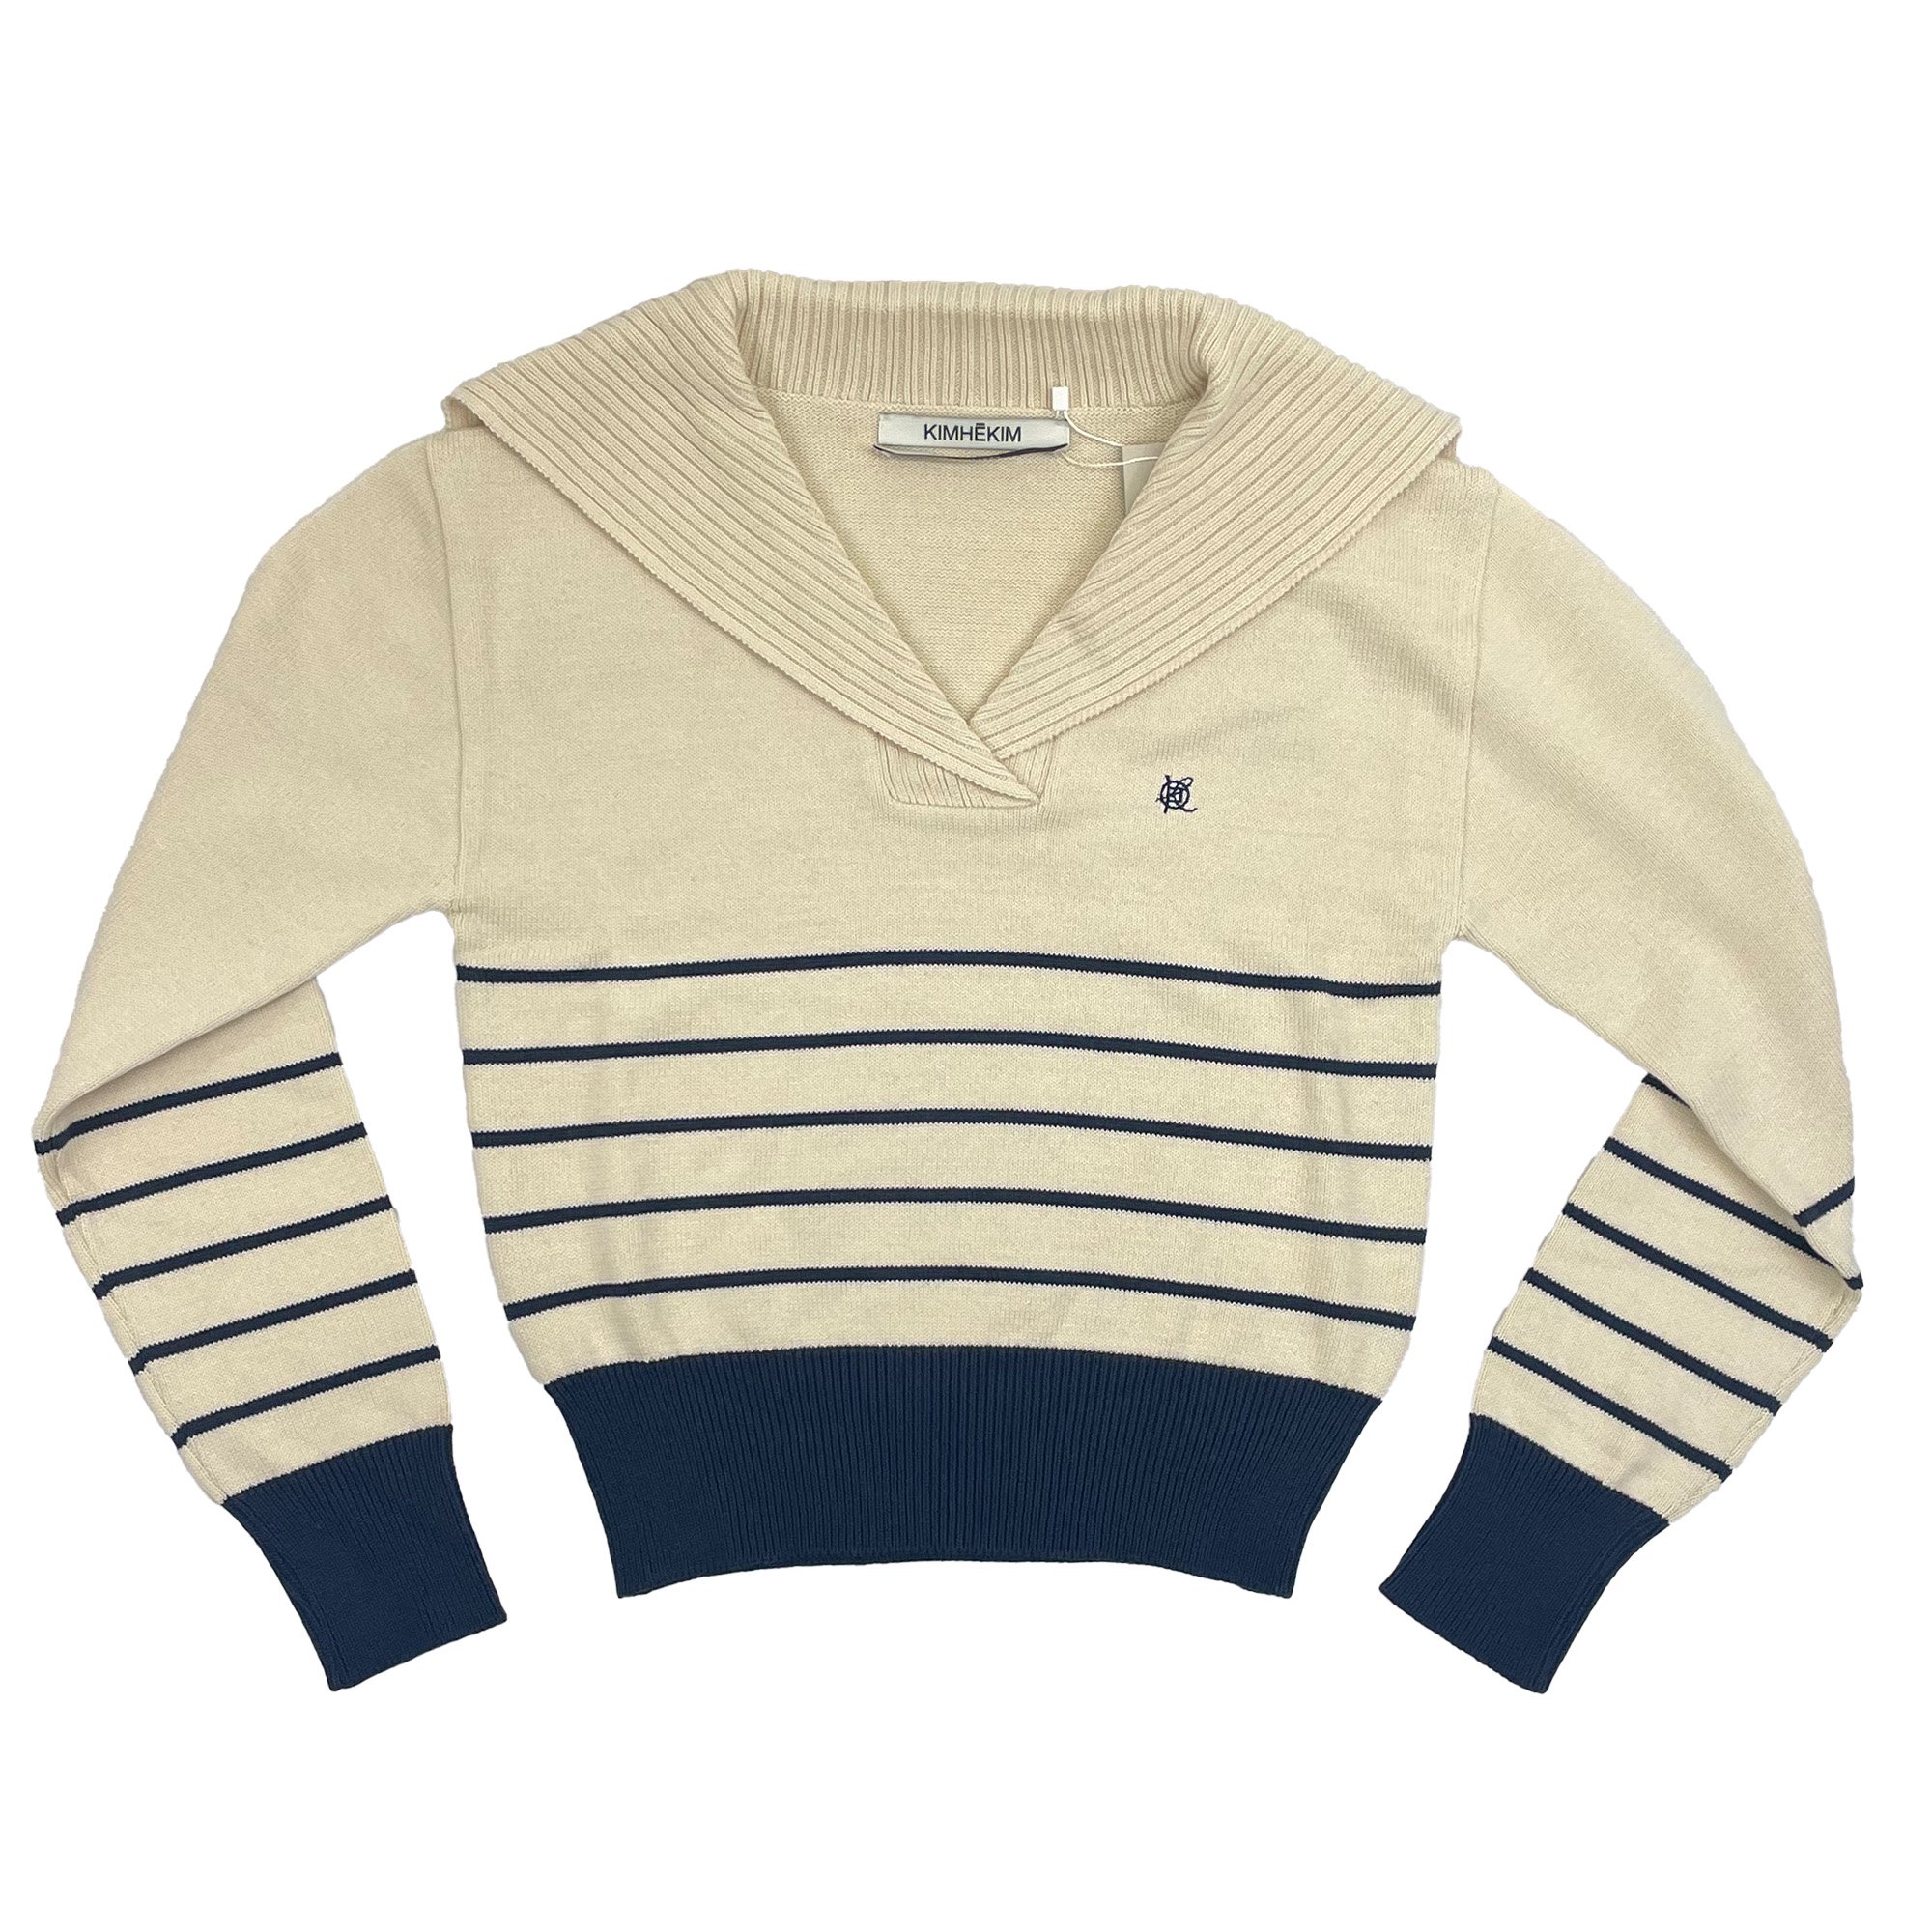 <img class='new_mark_img1' src='https://img.shop-pro.jp/img/new/icons7.gif' style='border:none;display:inline;margin:0px;padding:0px;width:auto;' />KIMHEKIM SAILOR COLLOR SWEATER